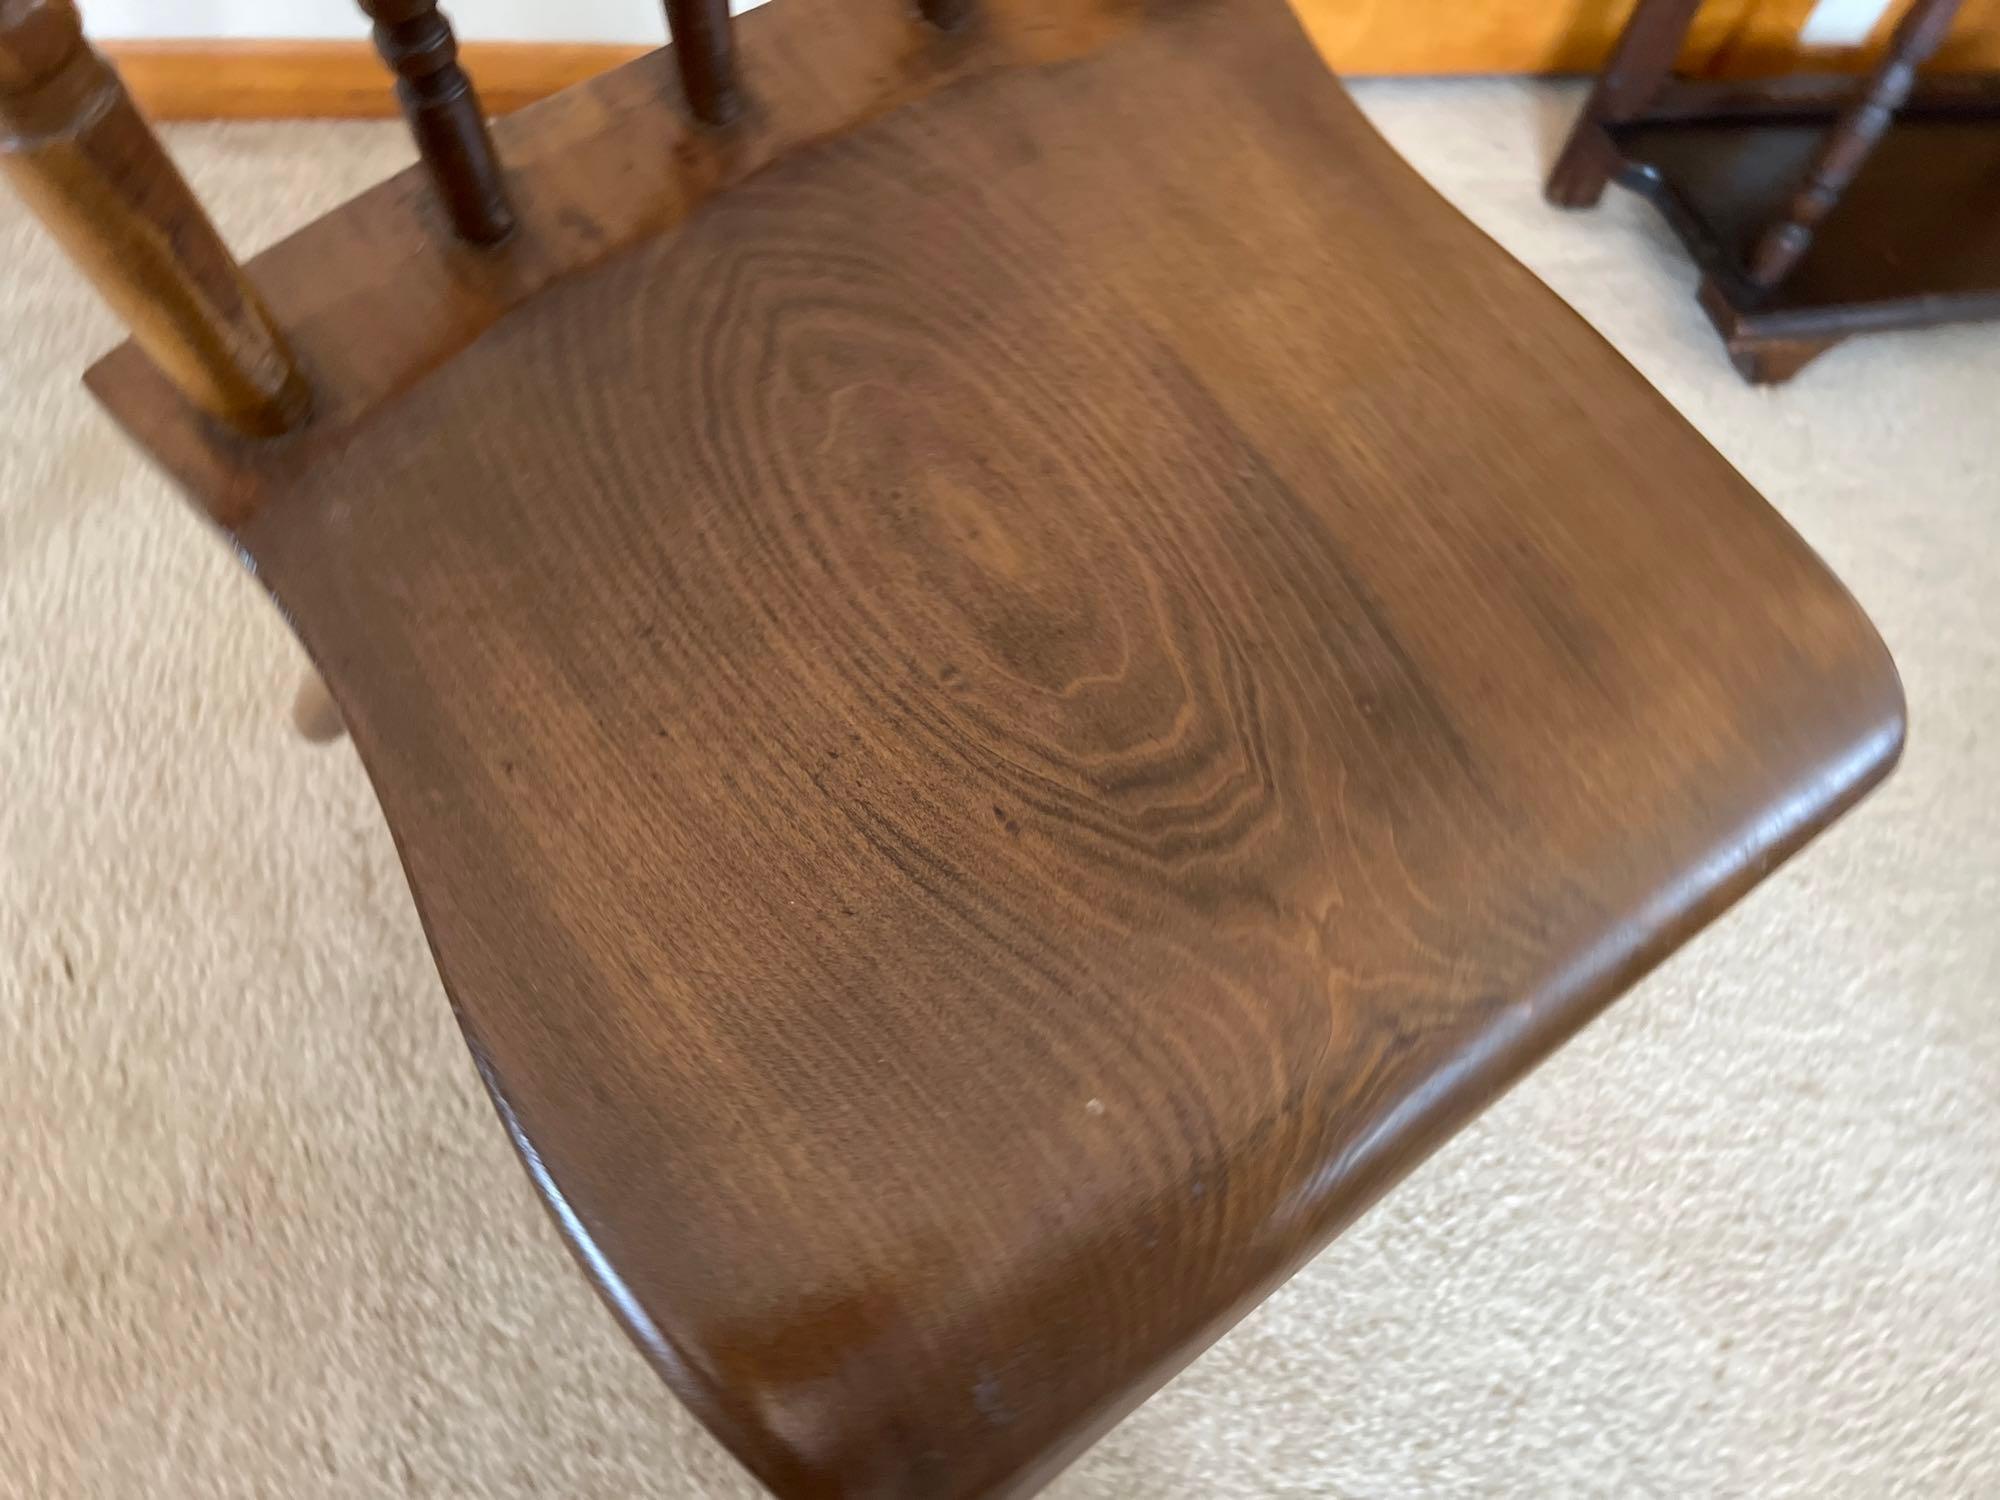 Pair of Wood Chairs